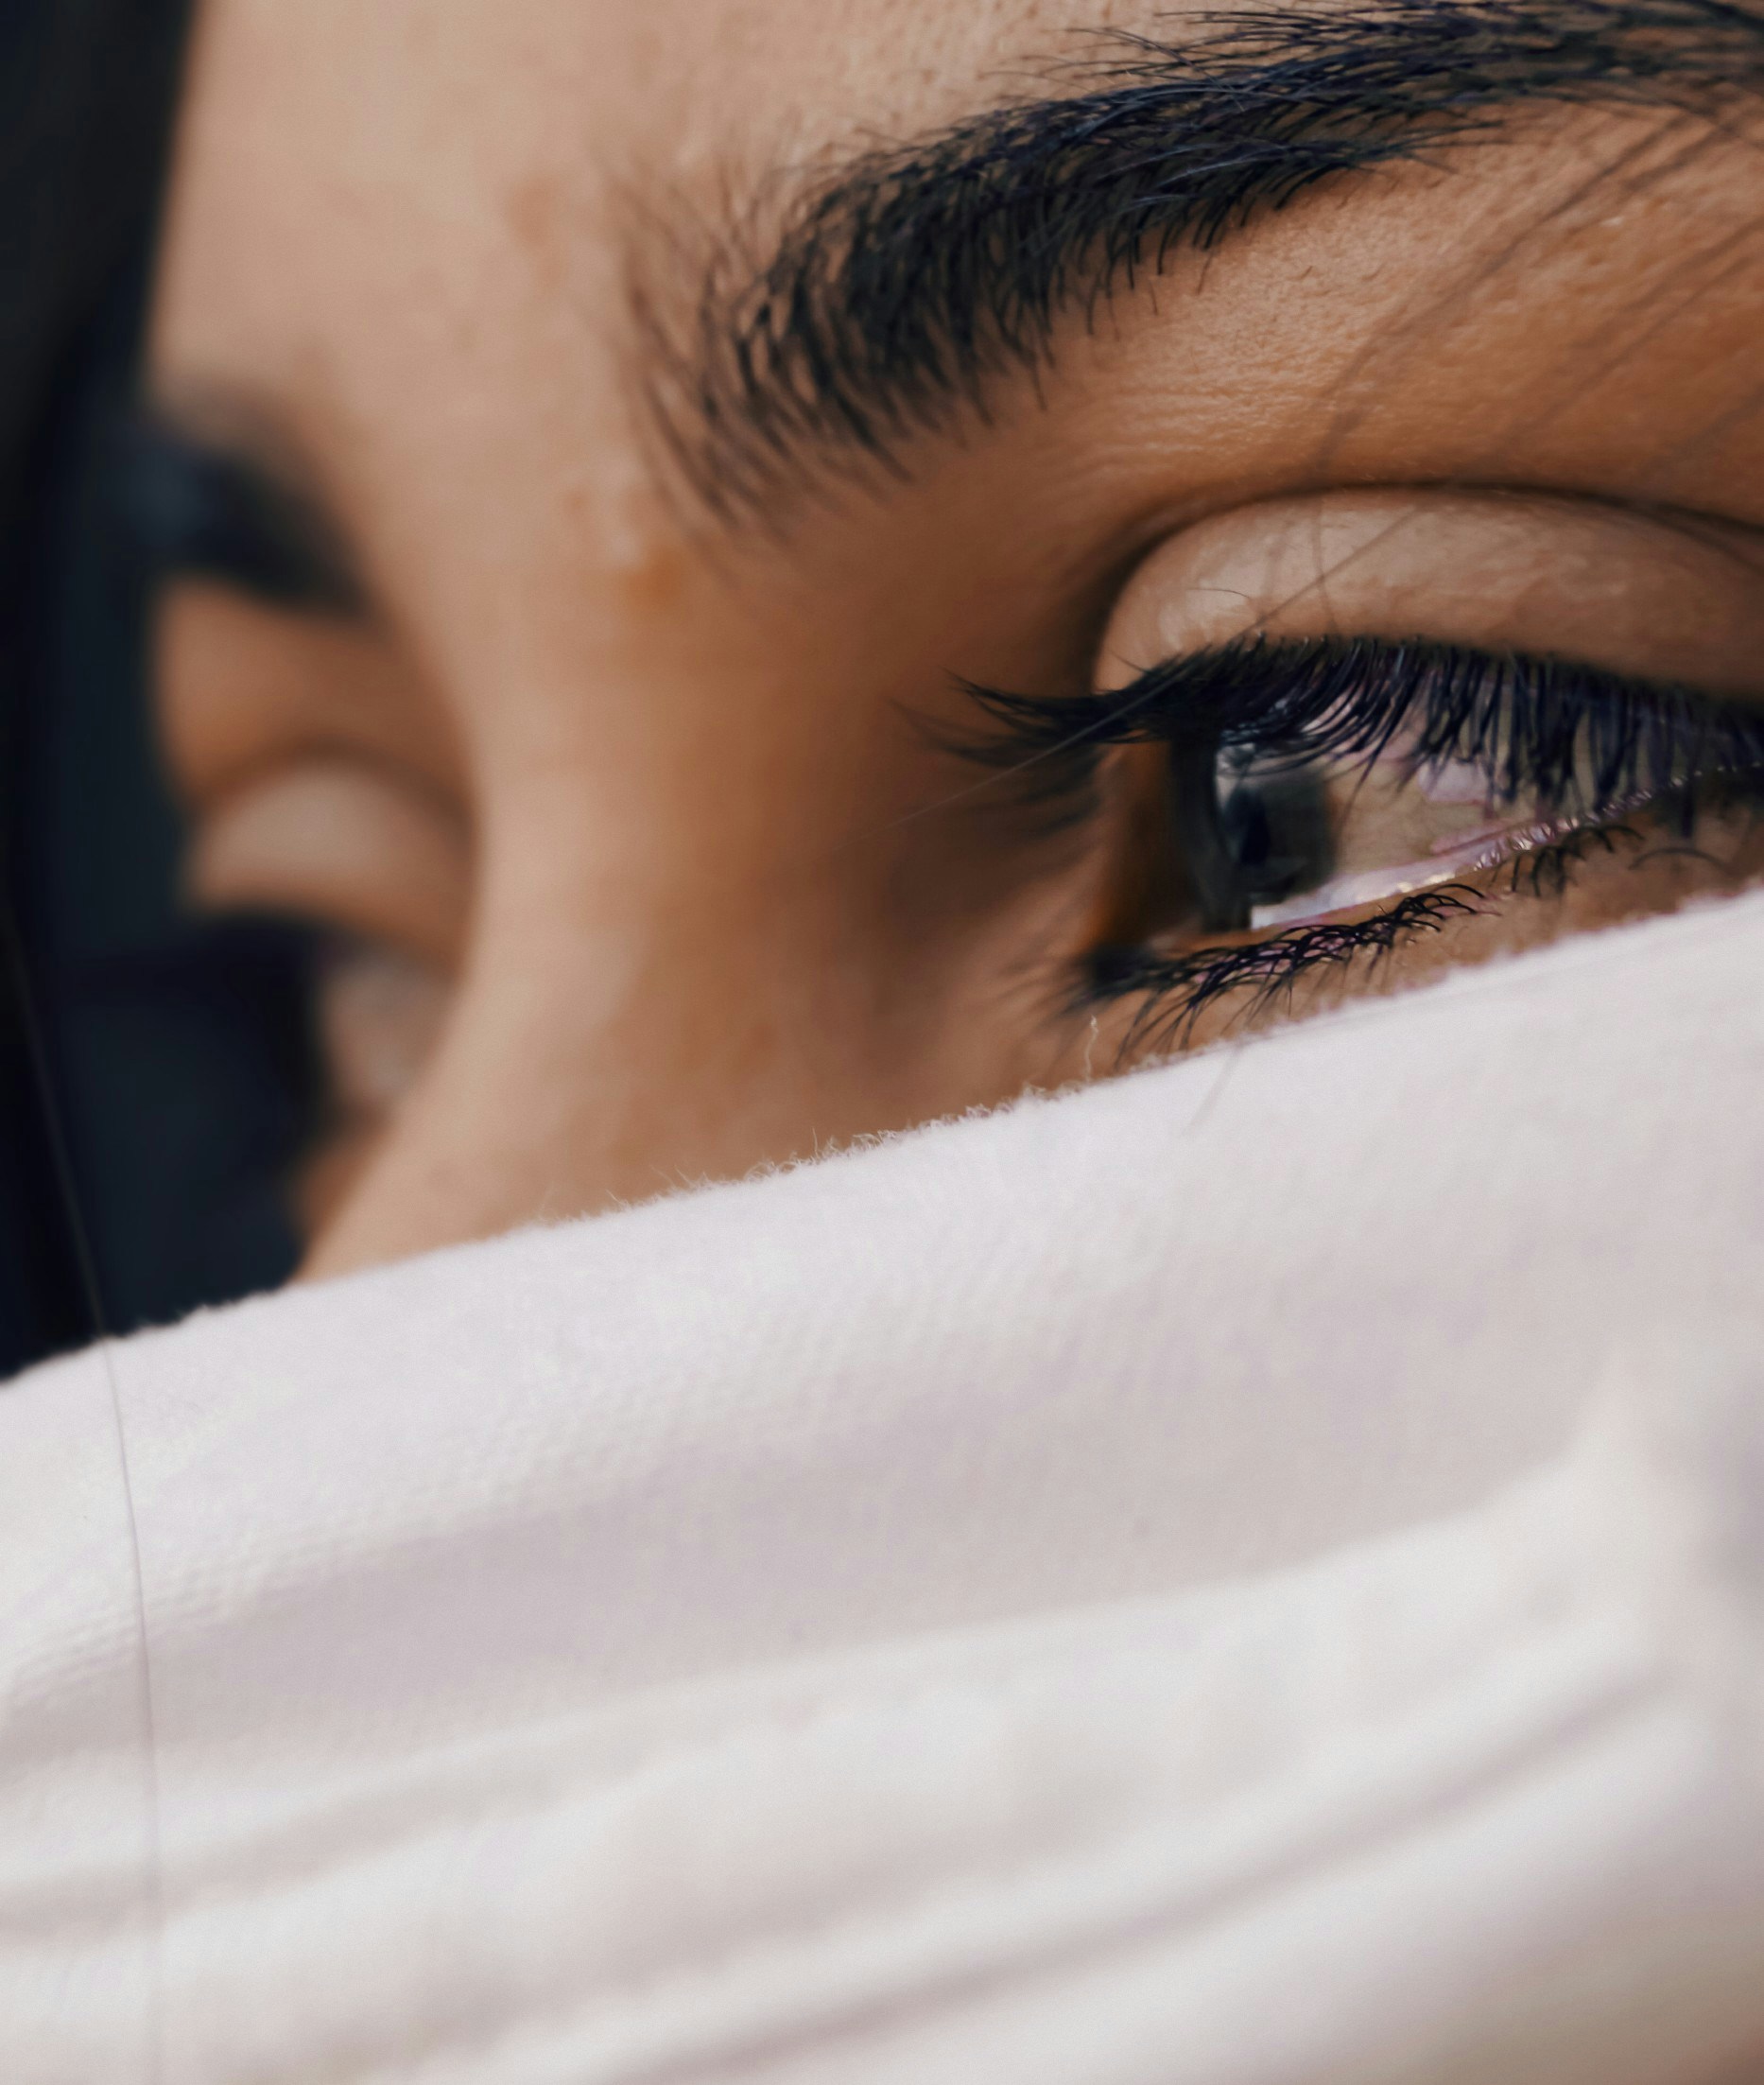 An extremely hurt teary-eyed woman | Source: Unsplash